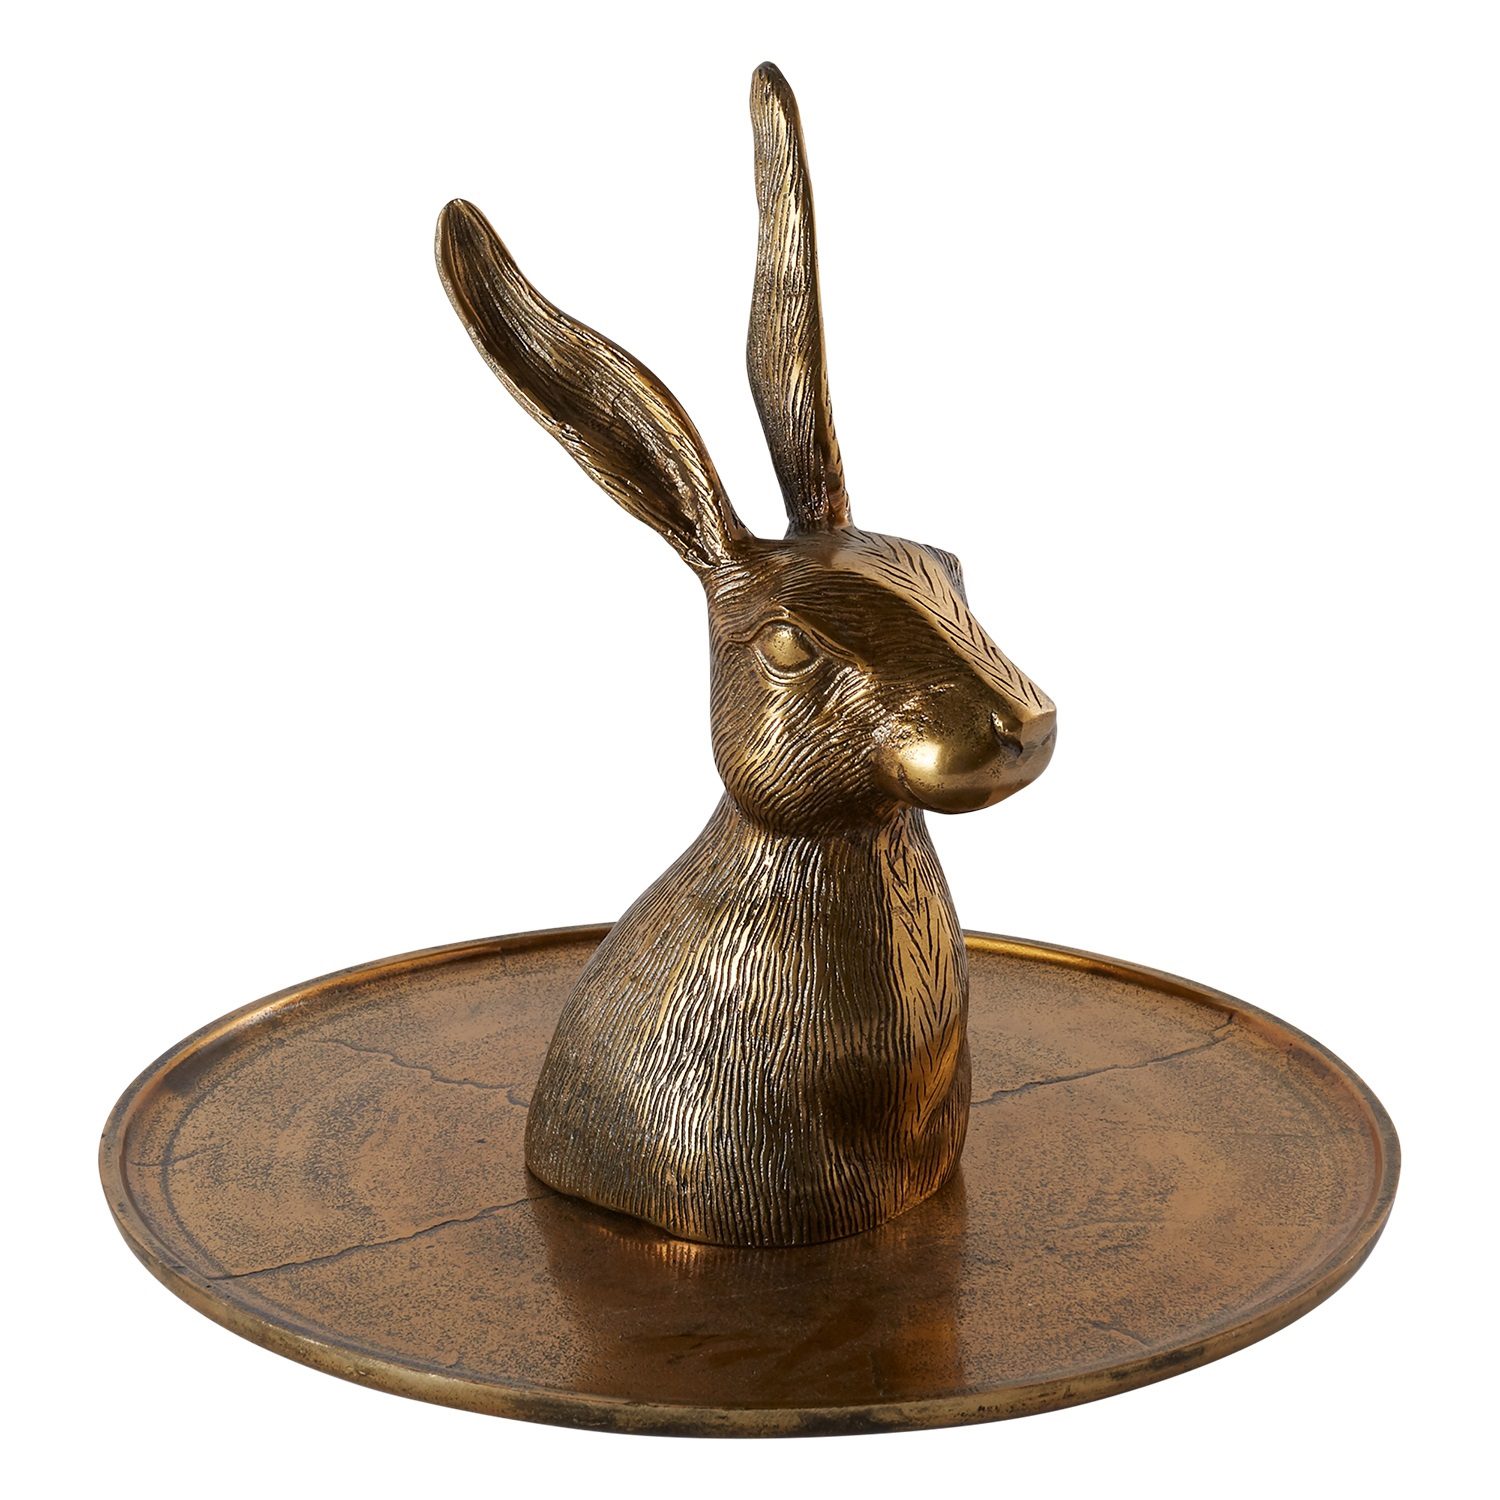 Eric + Eloise Halcyon Hare Platter in Gold